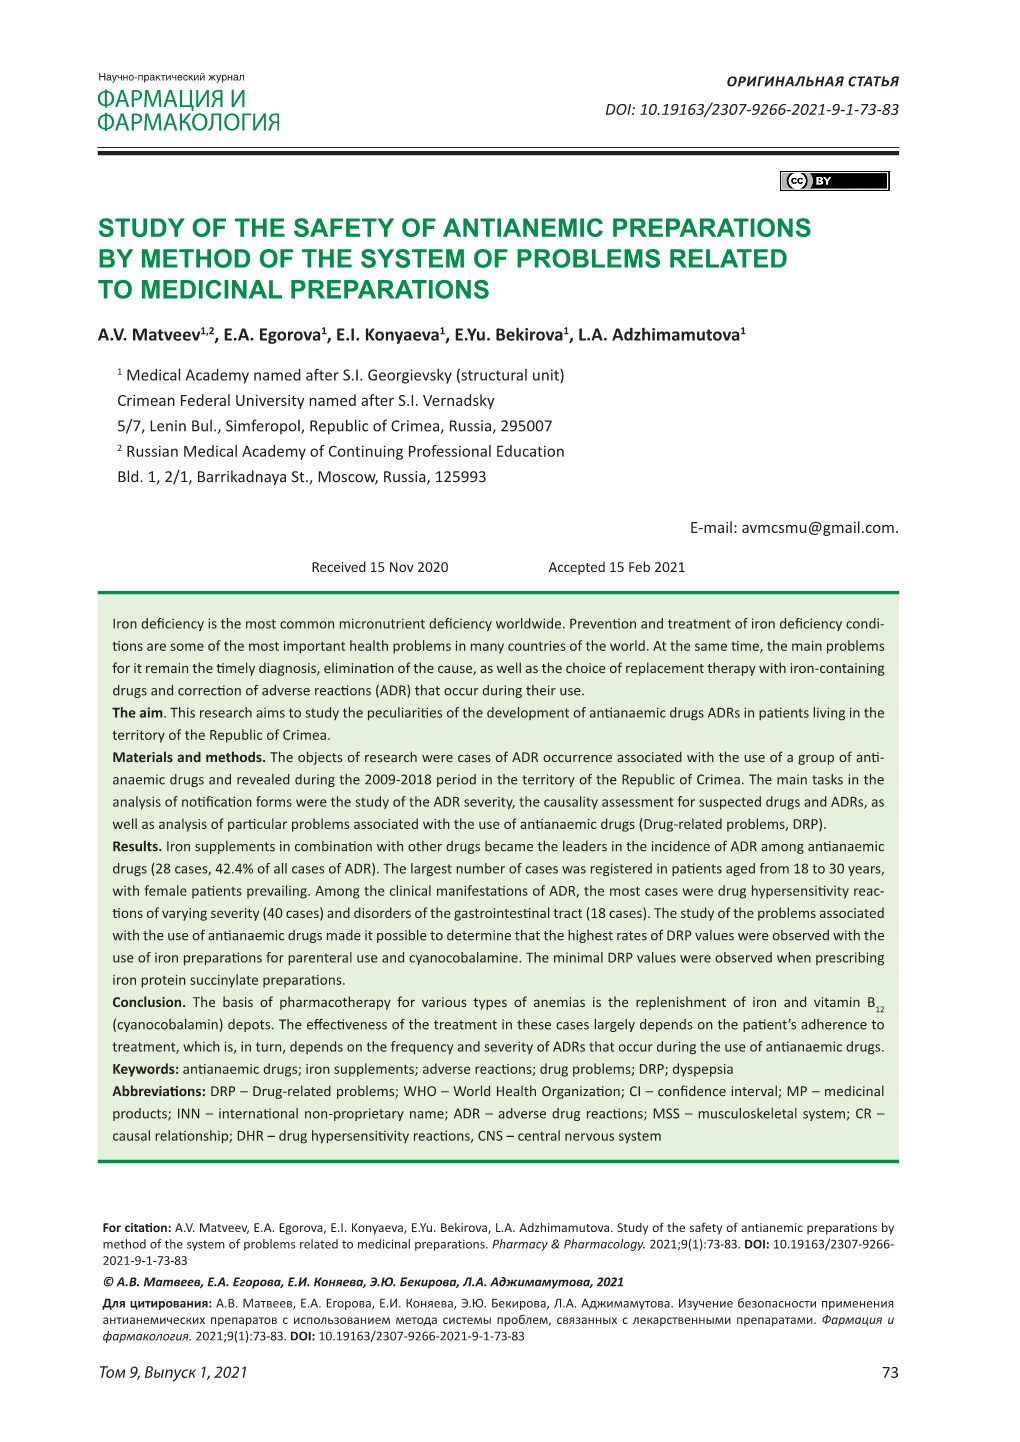 Study of the Safety of Antianemic Preparations by Method of the System of Problems Related to Medicinal Preparations